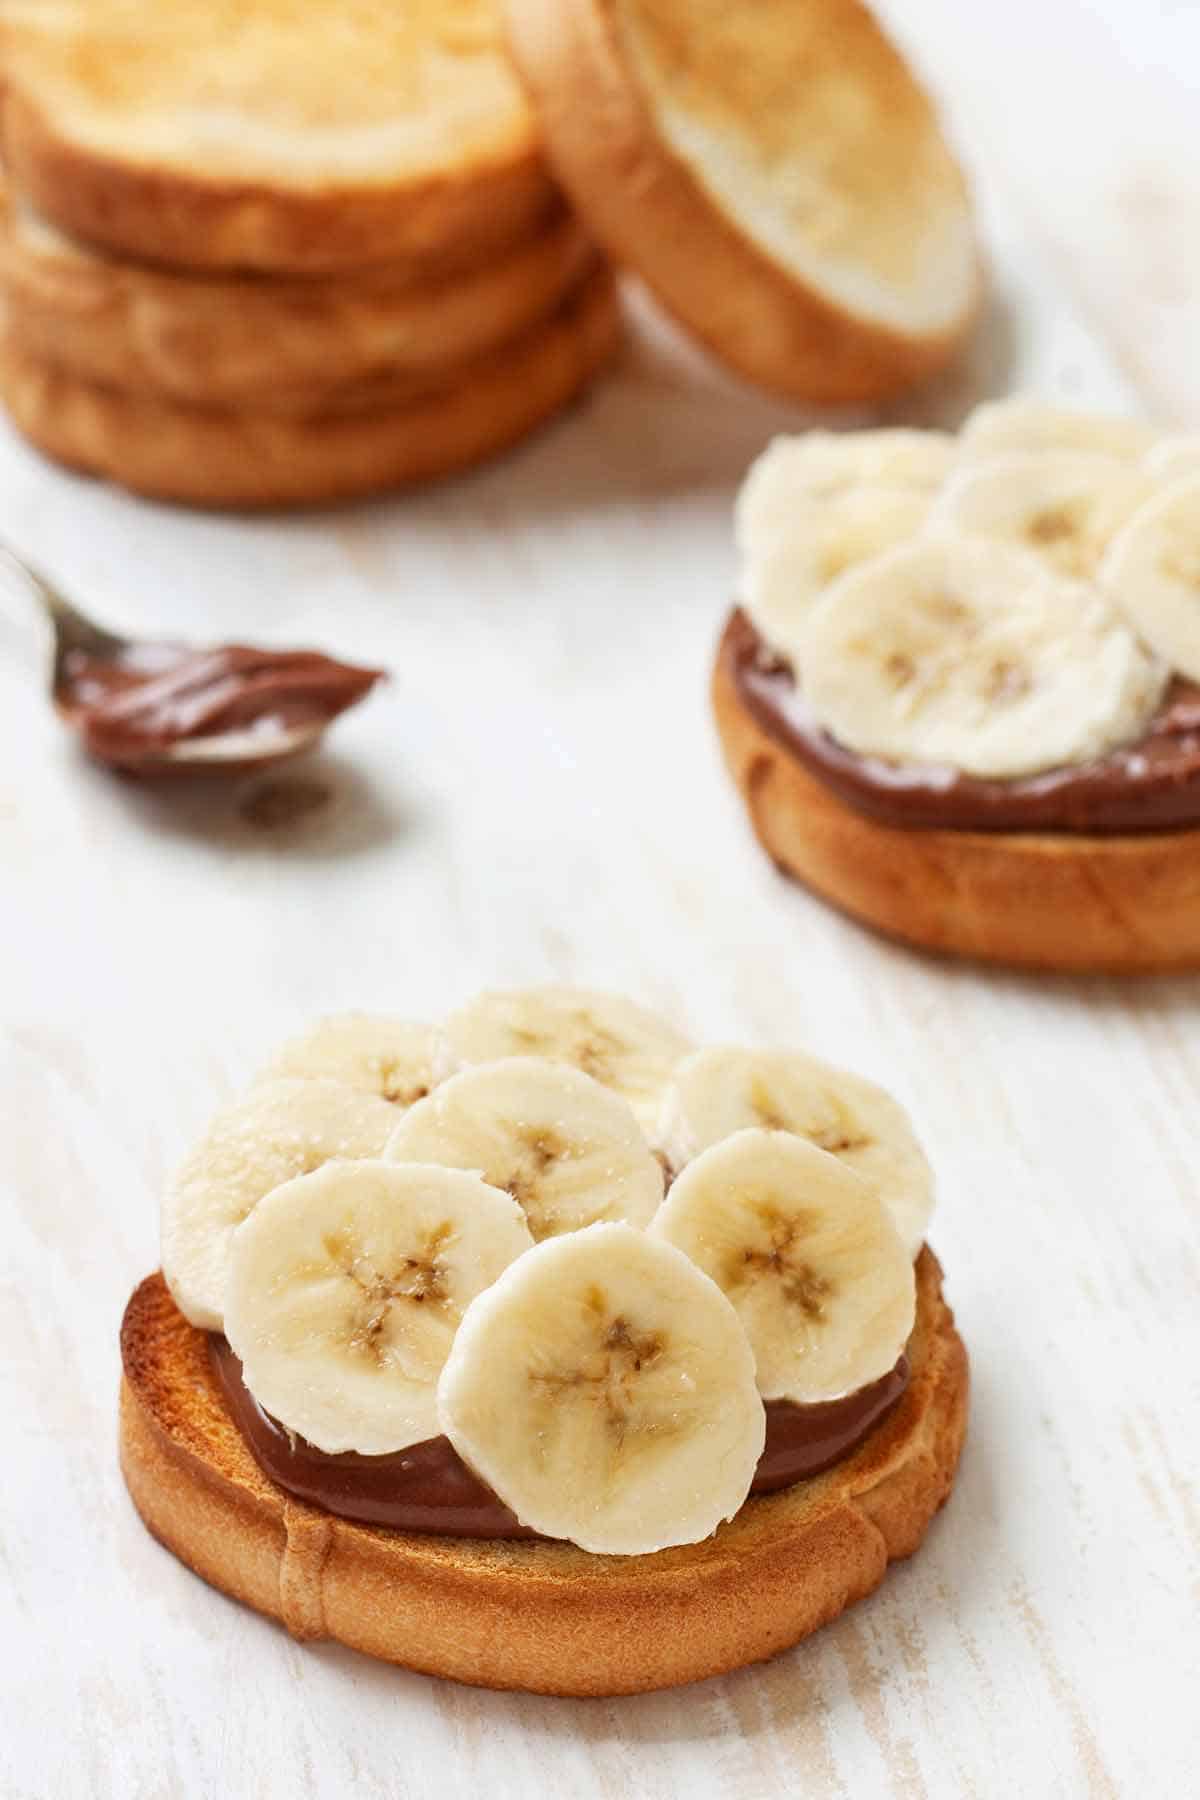 Open-faced banana nutella sandwiches on toasted bread.